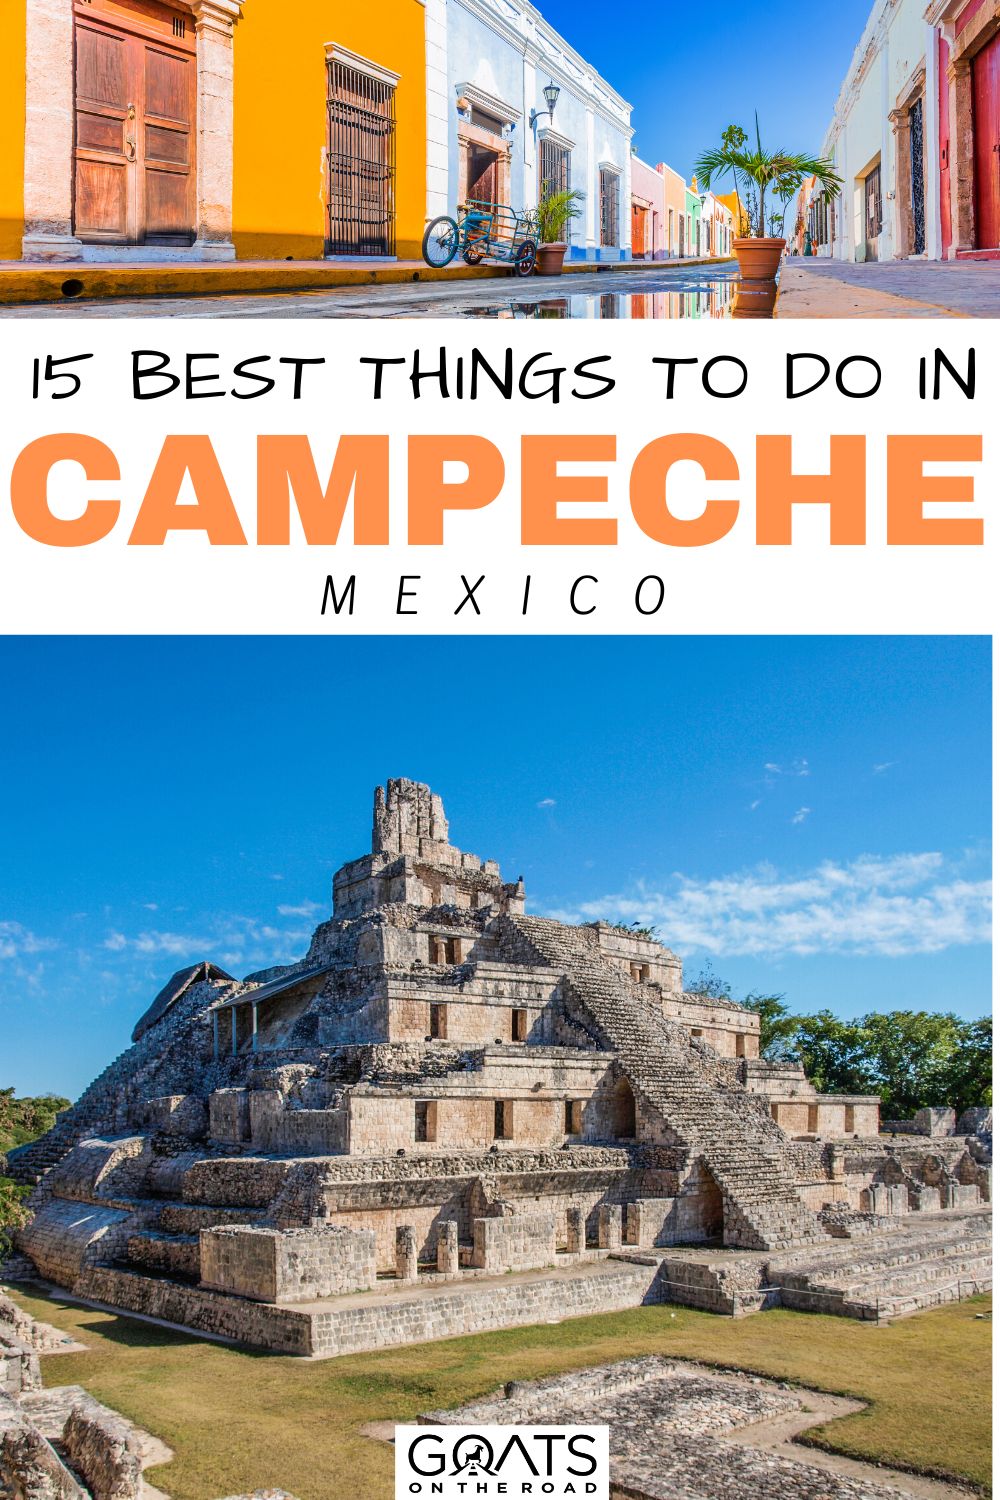 “15 Best Things To Do in Campeche, Mexico